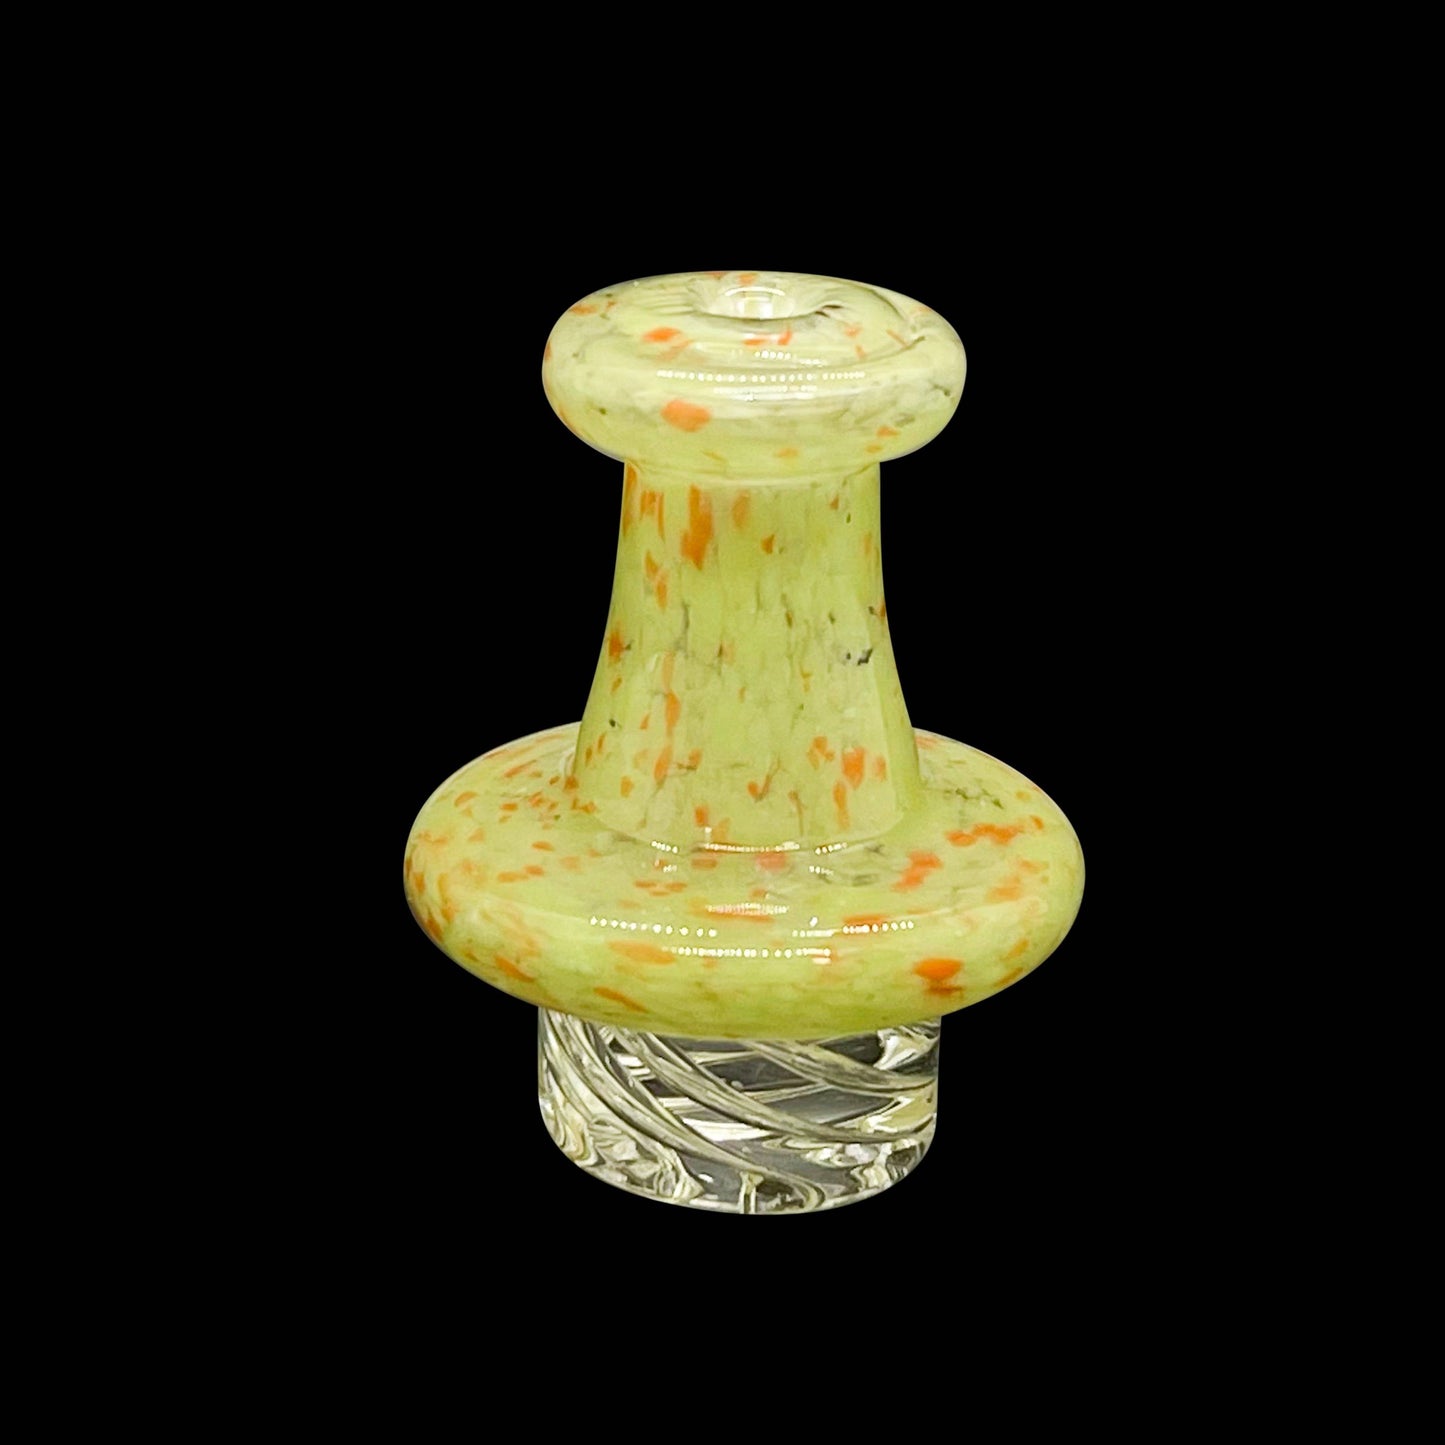 On Point Smoke - Mellow Yellow N Silo Spinning Carb Cap for 25mm Quartz Bangers - OPS.com